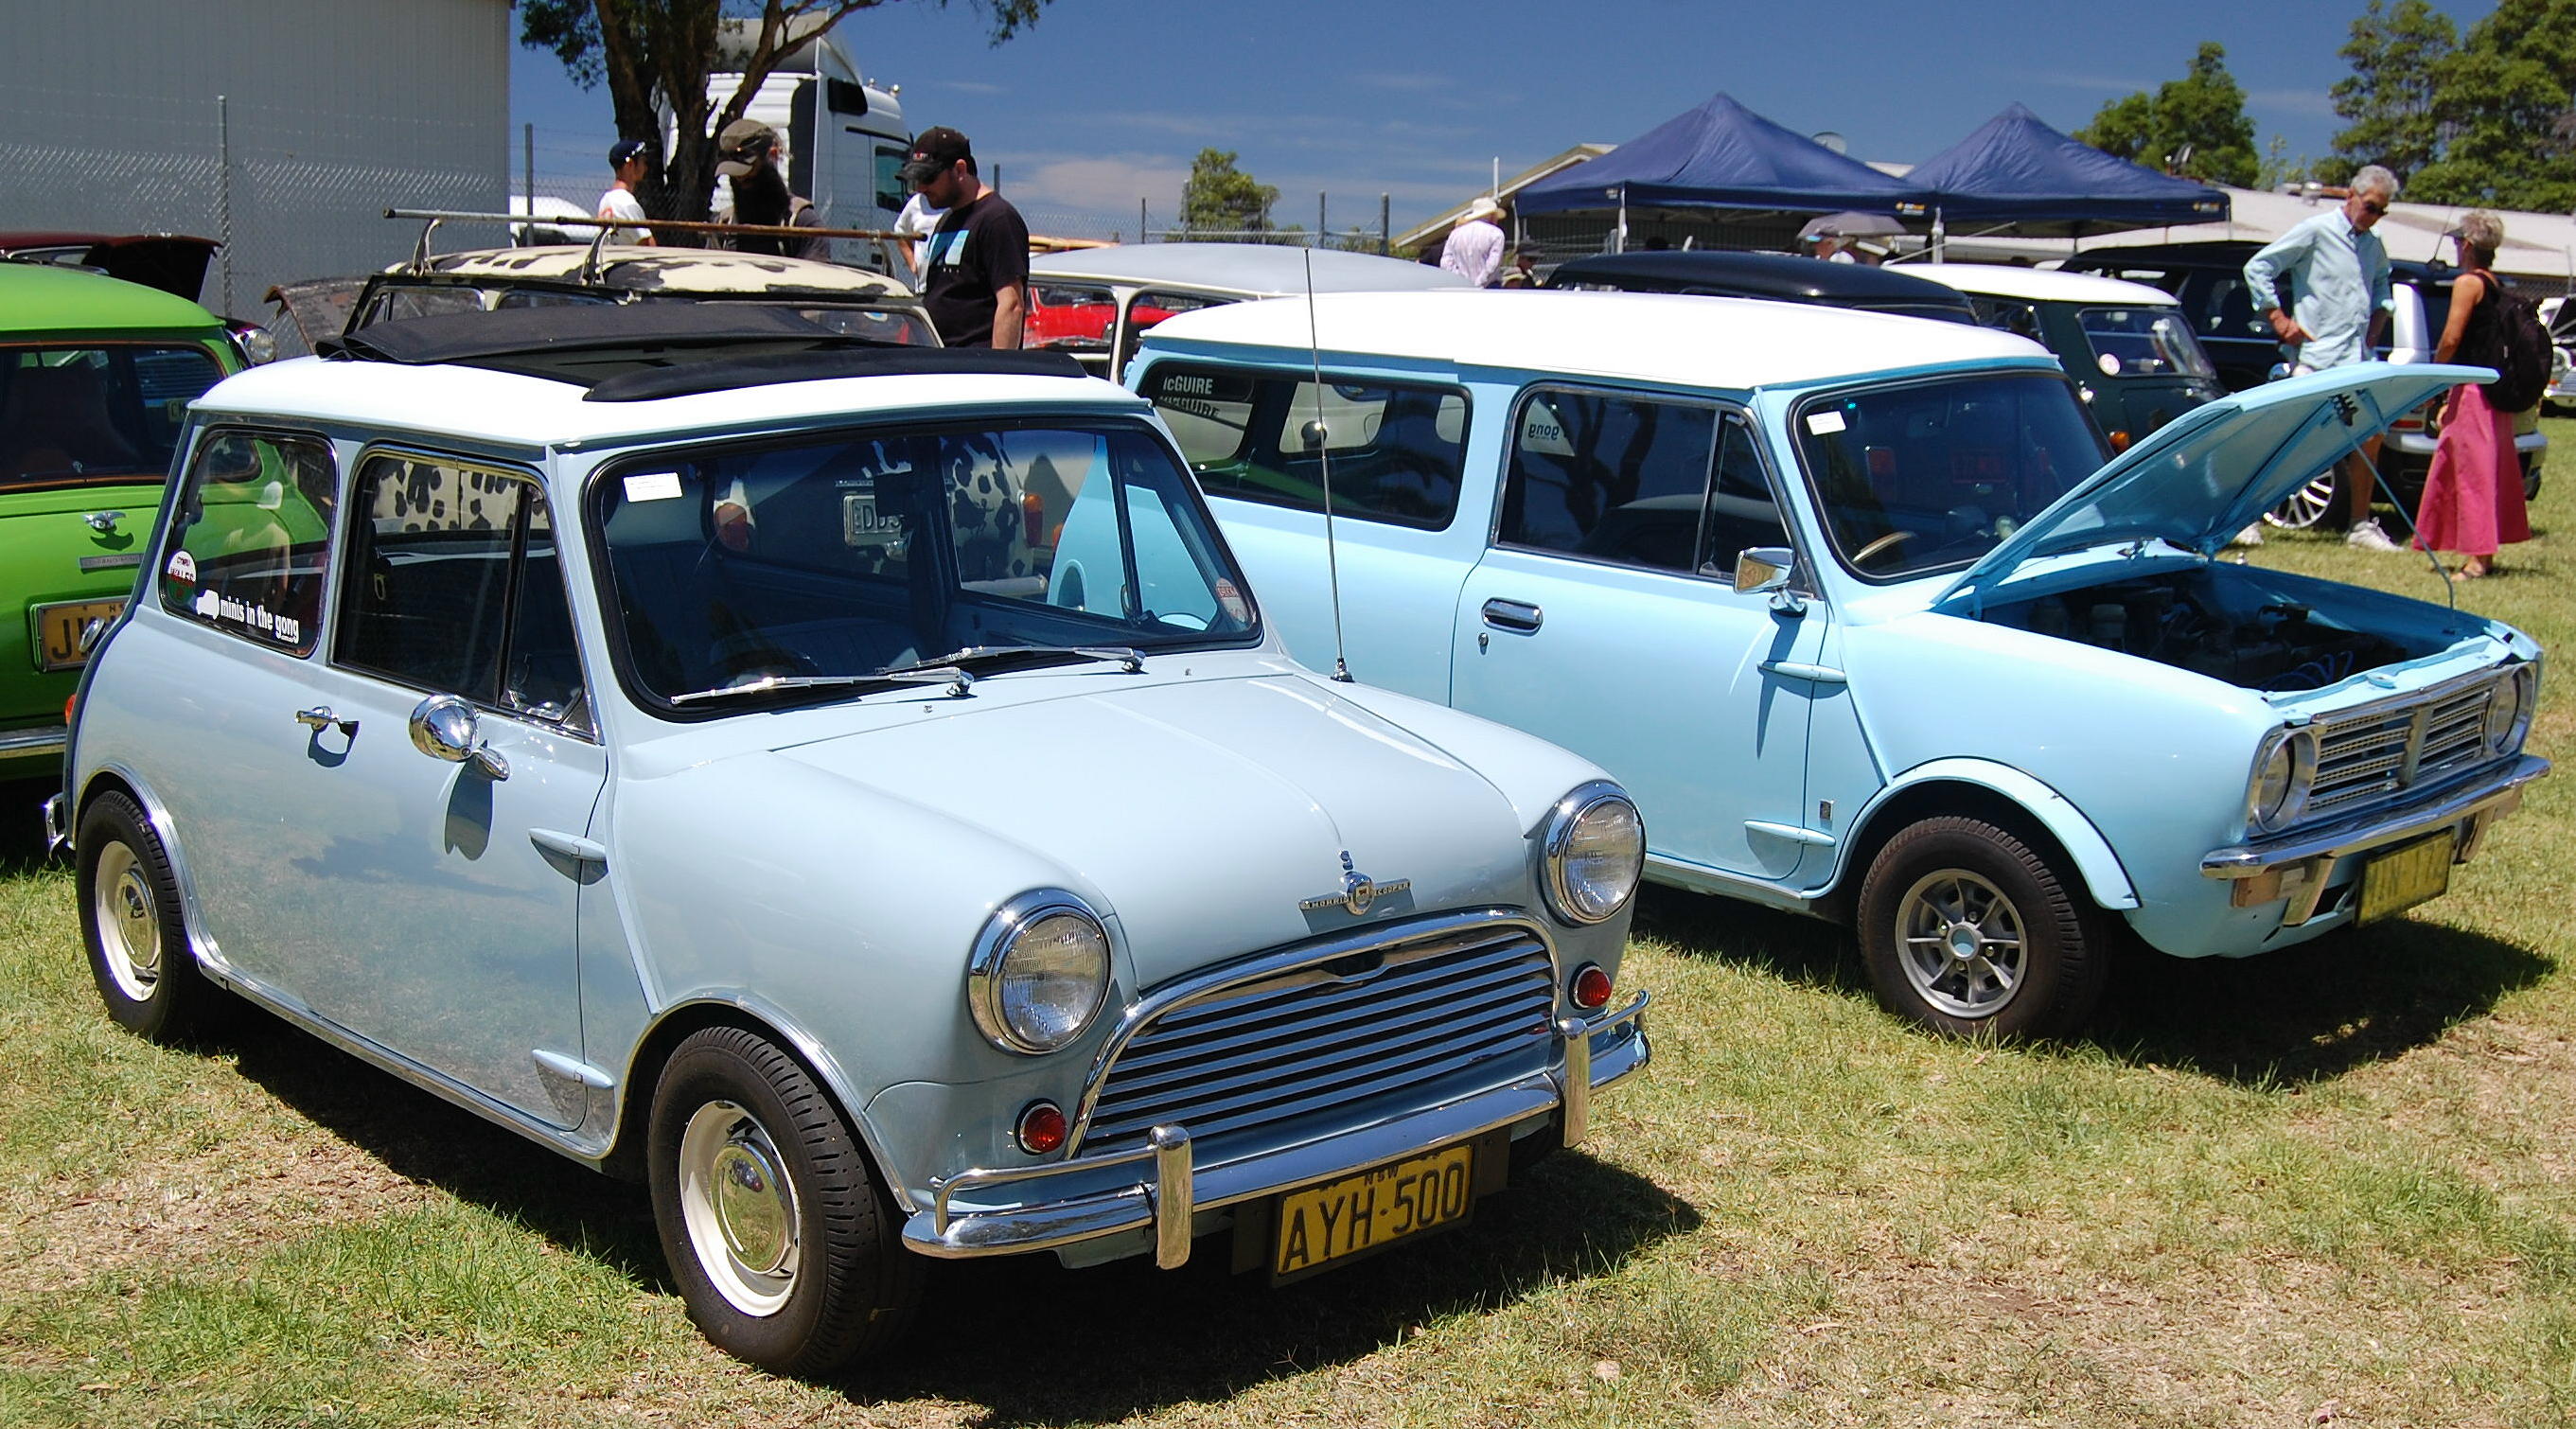 Minis shine at Australia's Minis in the Gong event